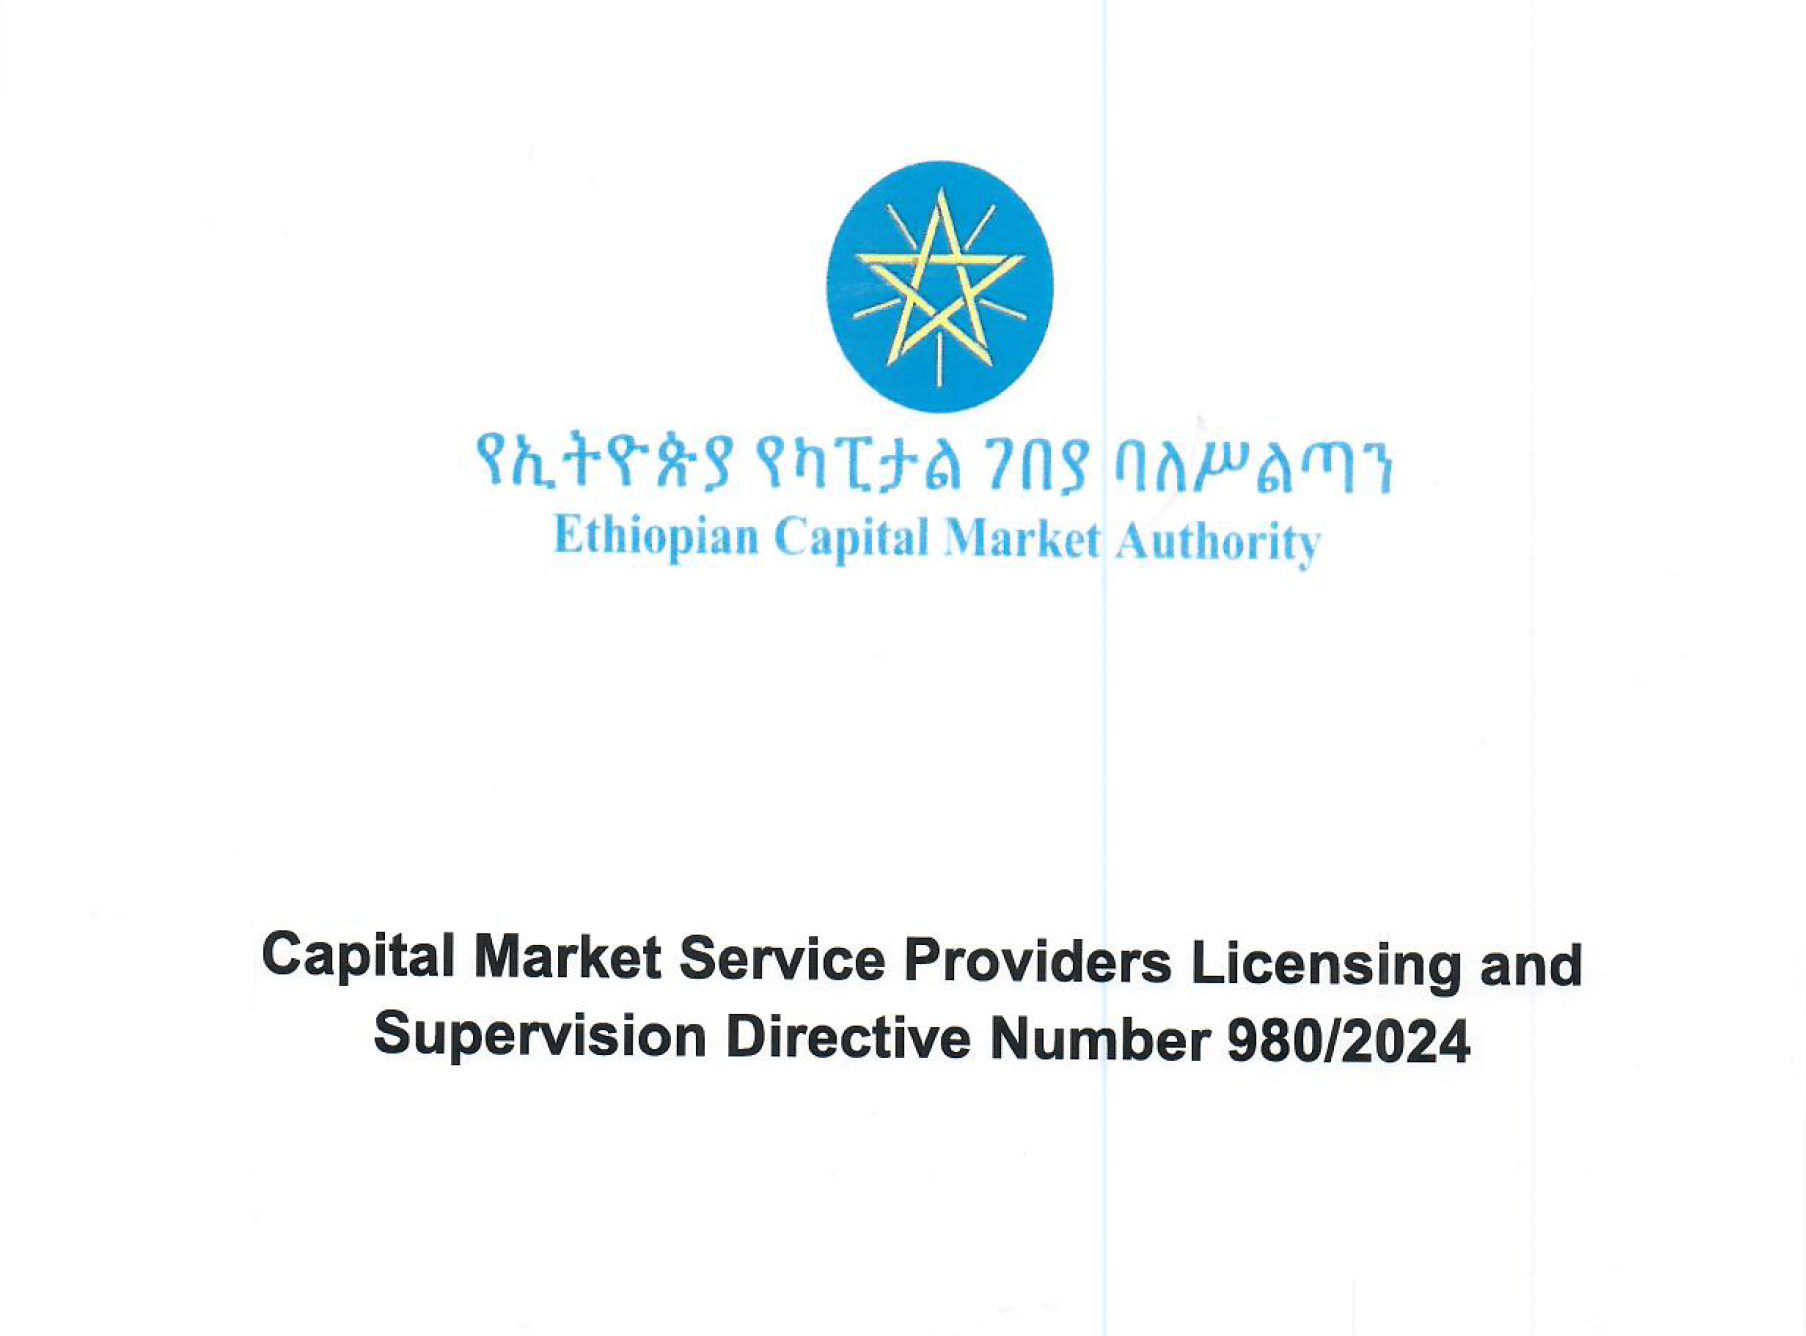 Ethiopia Capital Market Services Providers Licensing and Supervision Directive no 980-2014